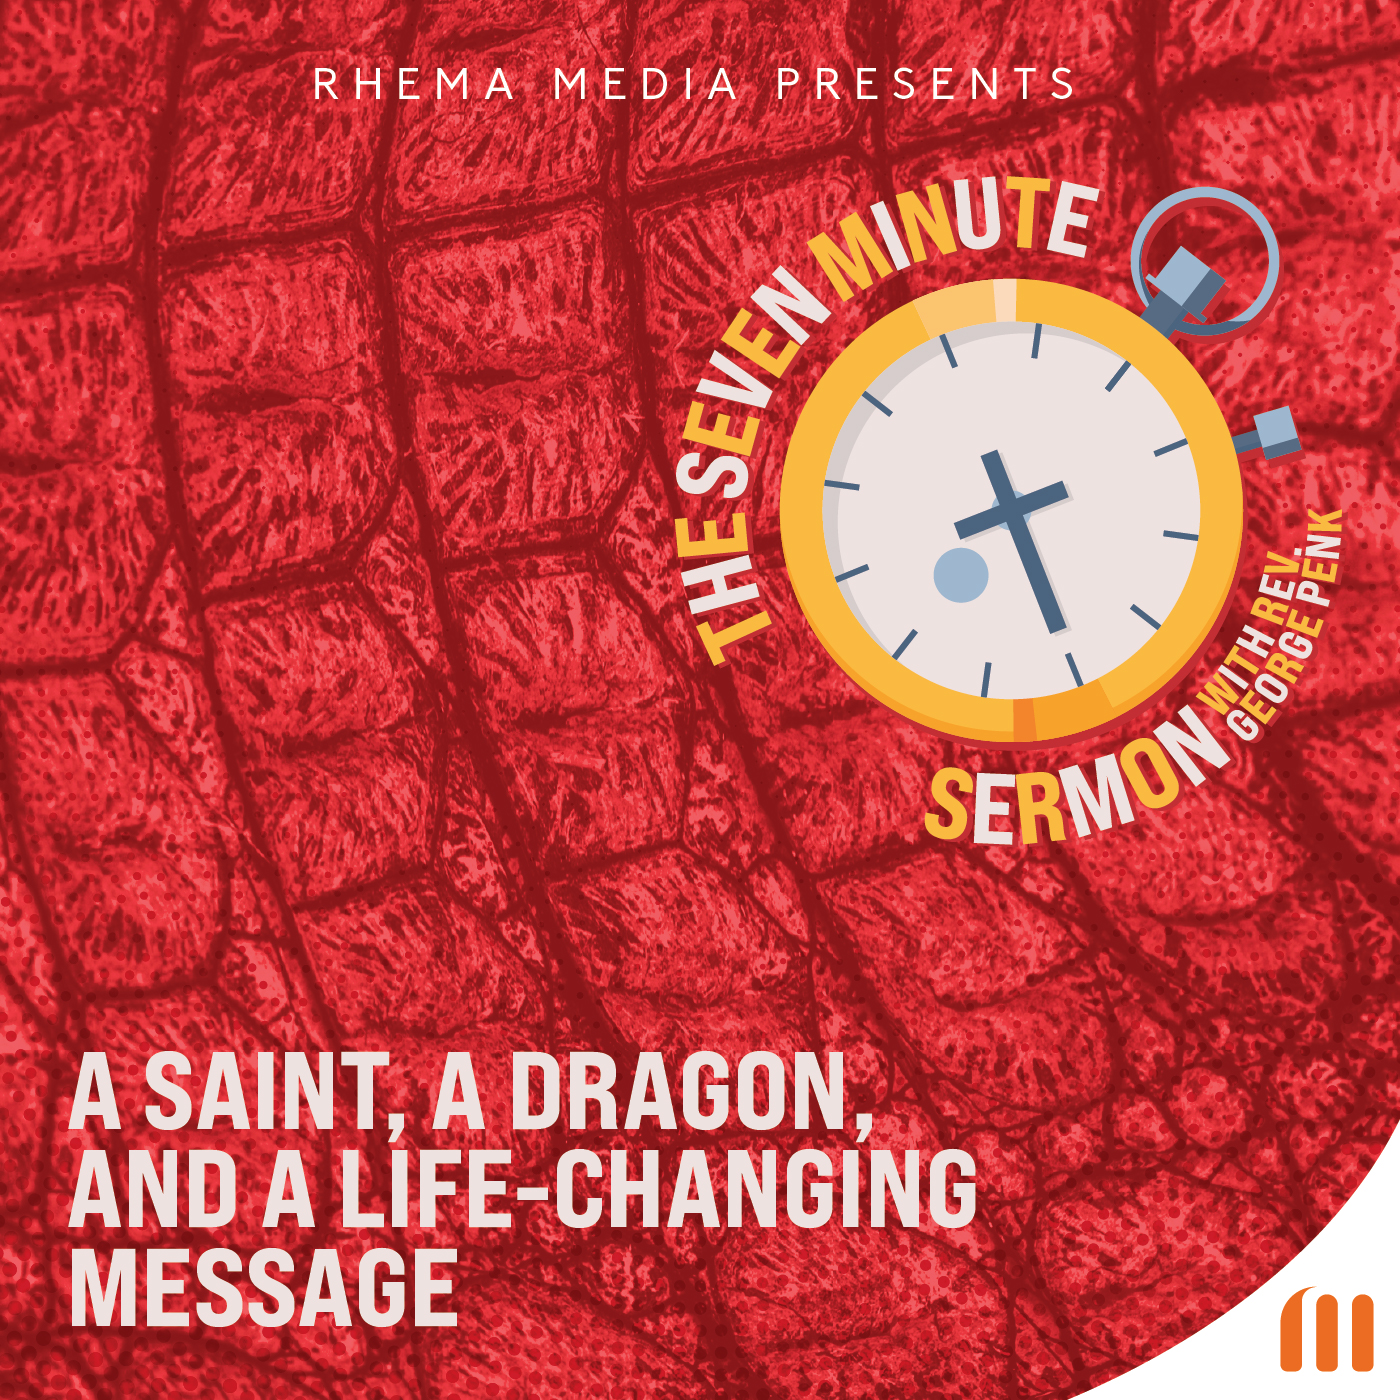 A saint, a dragon, and a life-changing message